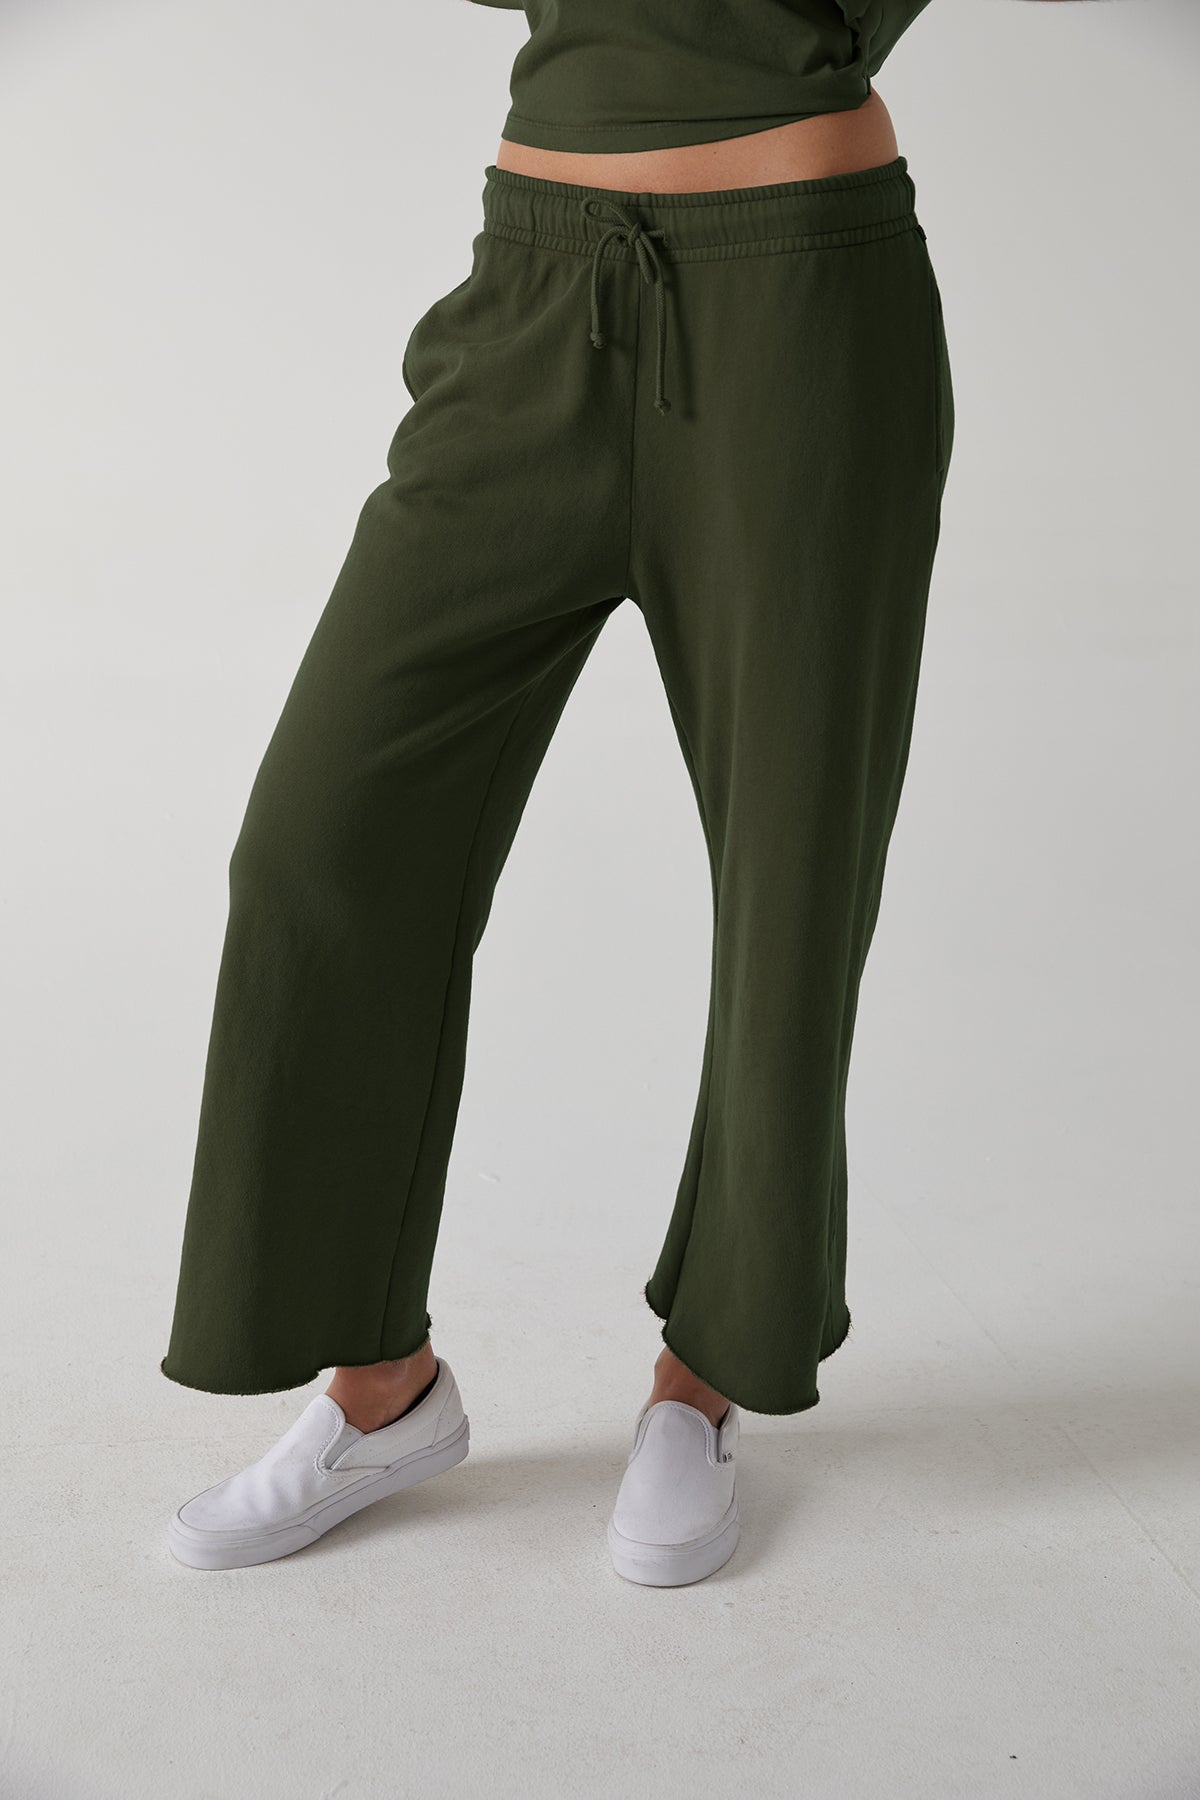   Montecito Sweatpant in dillweed green front 